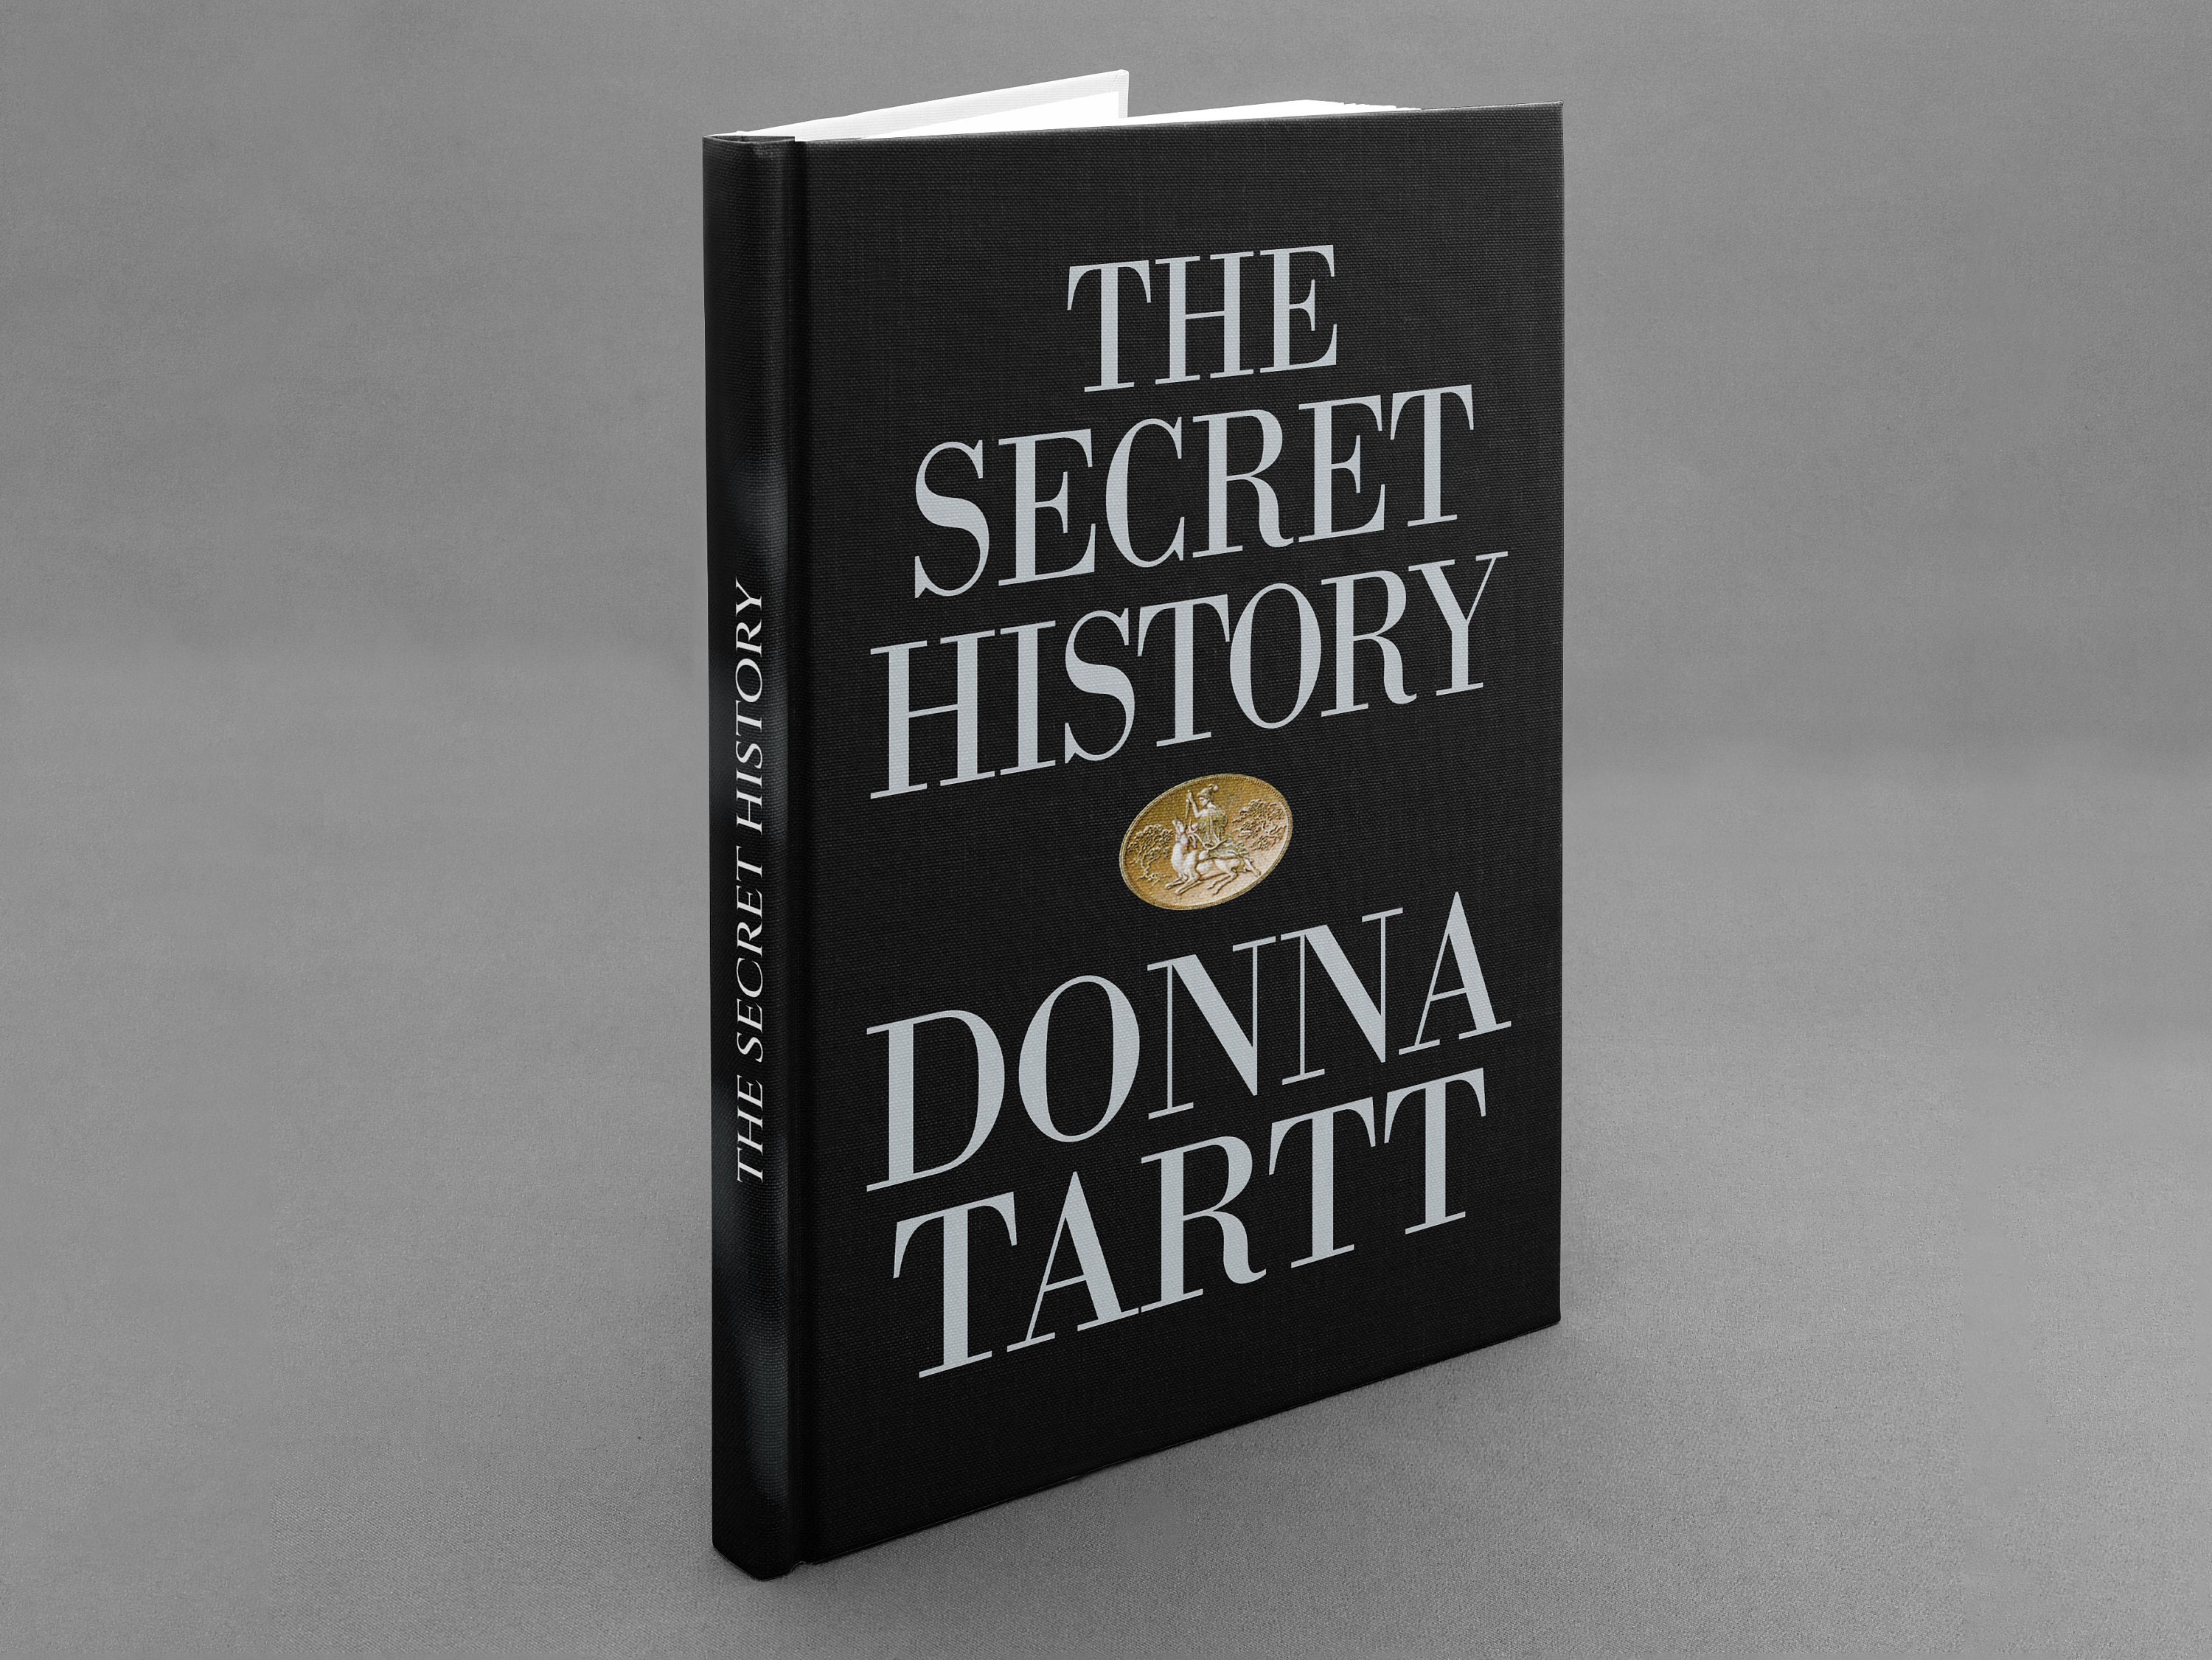 The Secret History Journal Donna Tartt, the Secret History Notebook, Book  Journal, Hardcover Notebook, Book Lover Gift, Bookish Gifts 